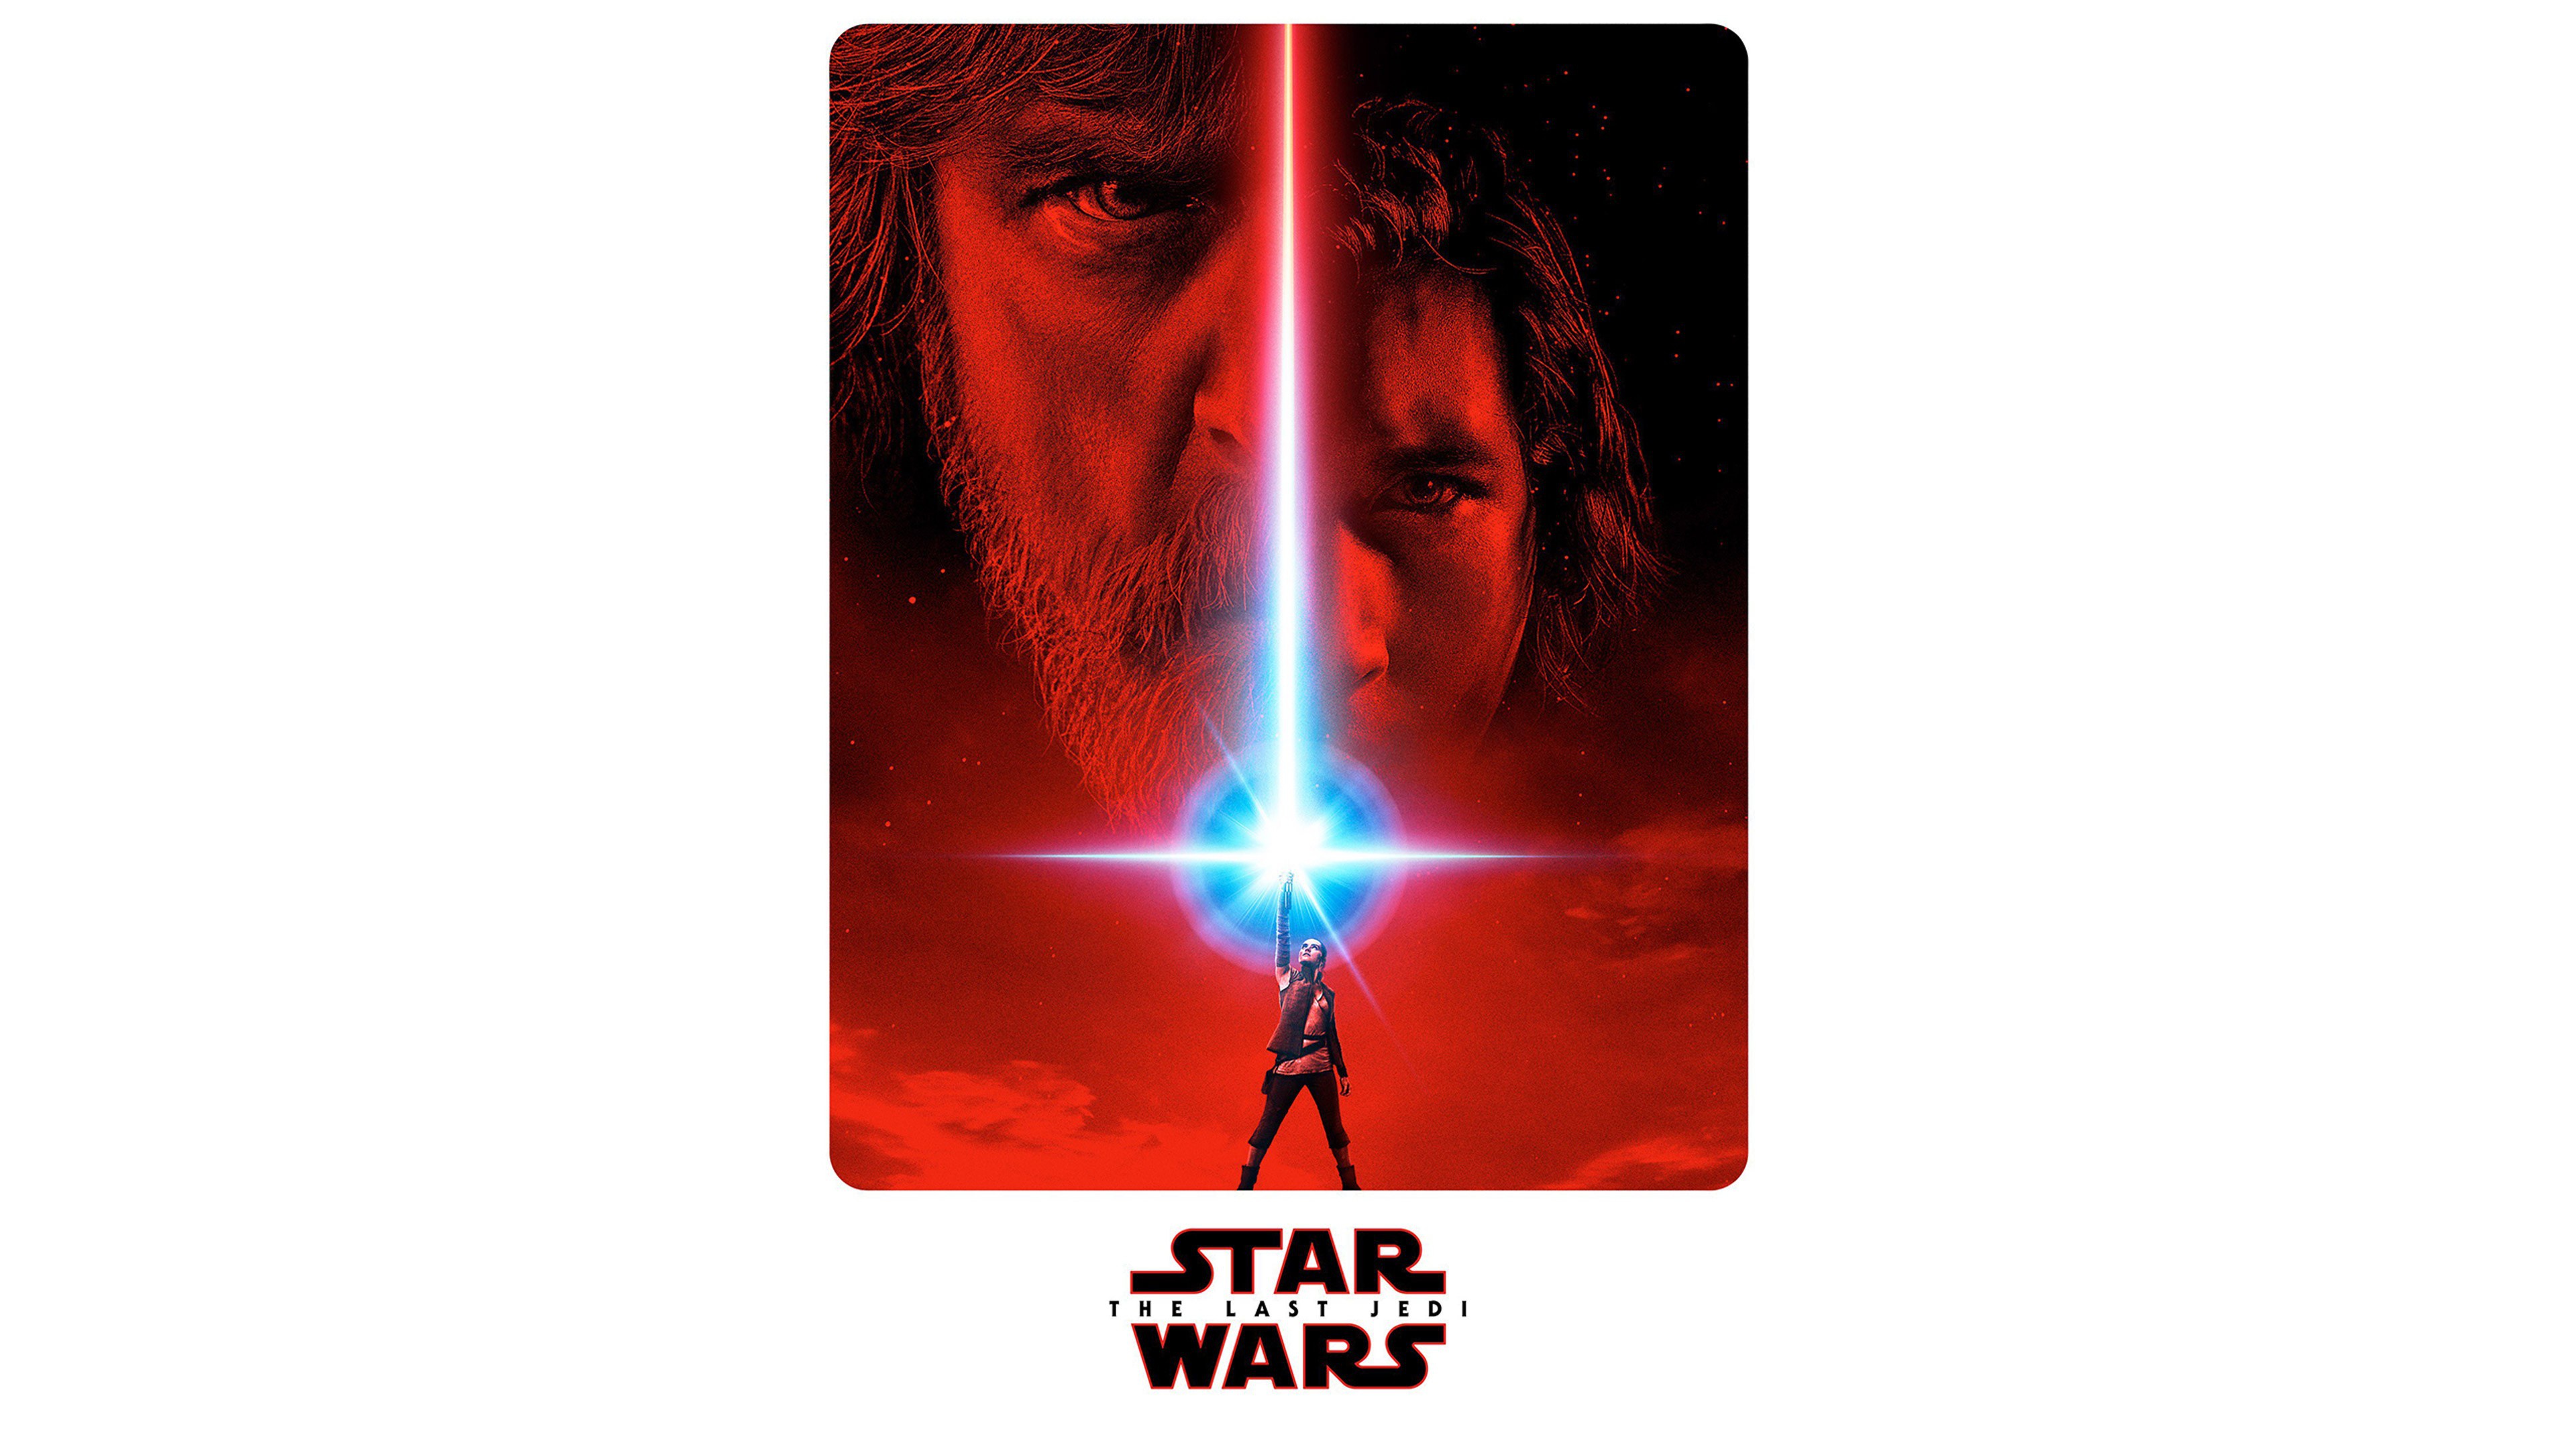 Star Wars Episode Viii The Last Jedi Wallpapers Pictures Images